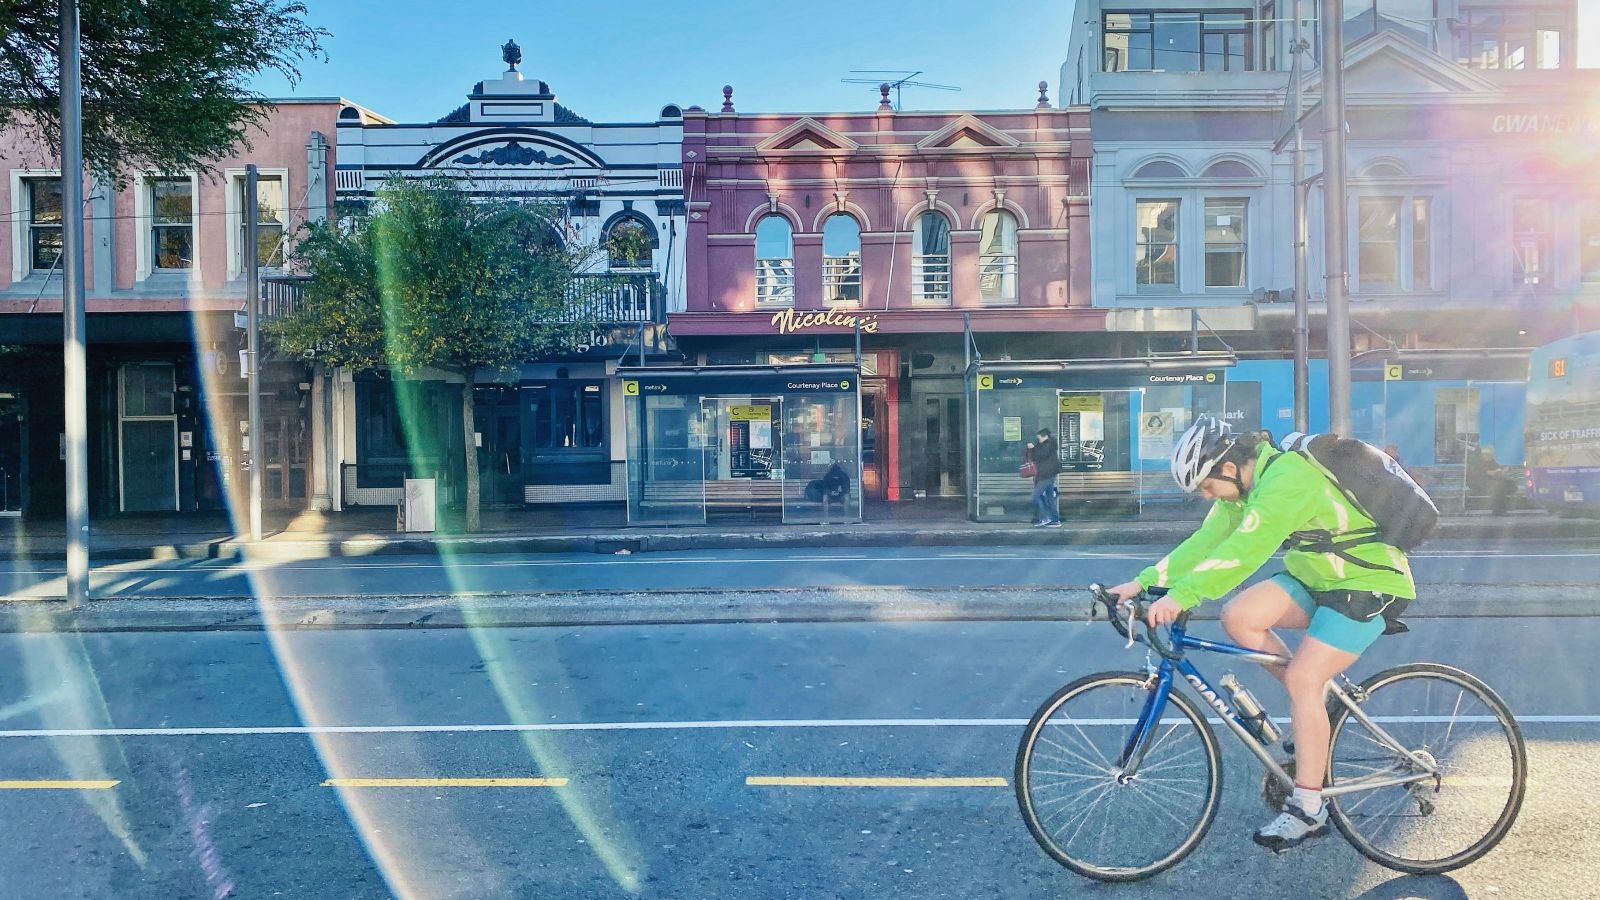 person on bike with newtown buildings in background